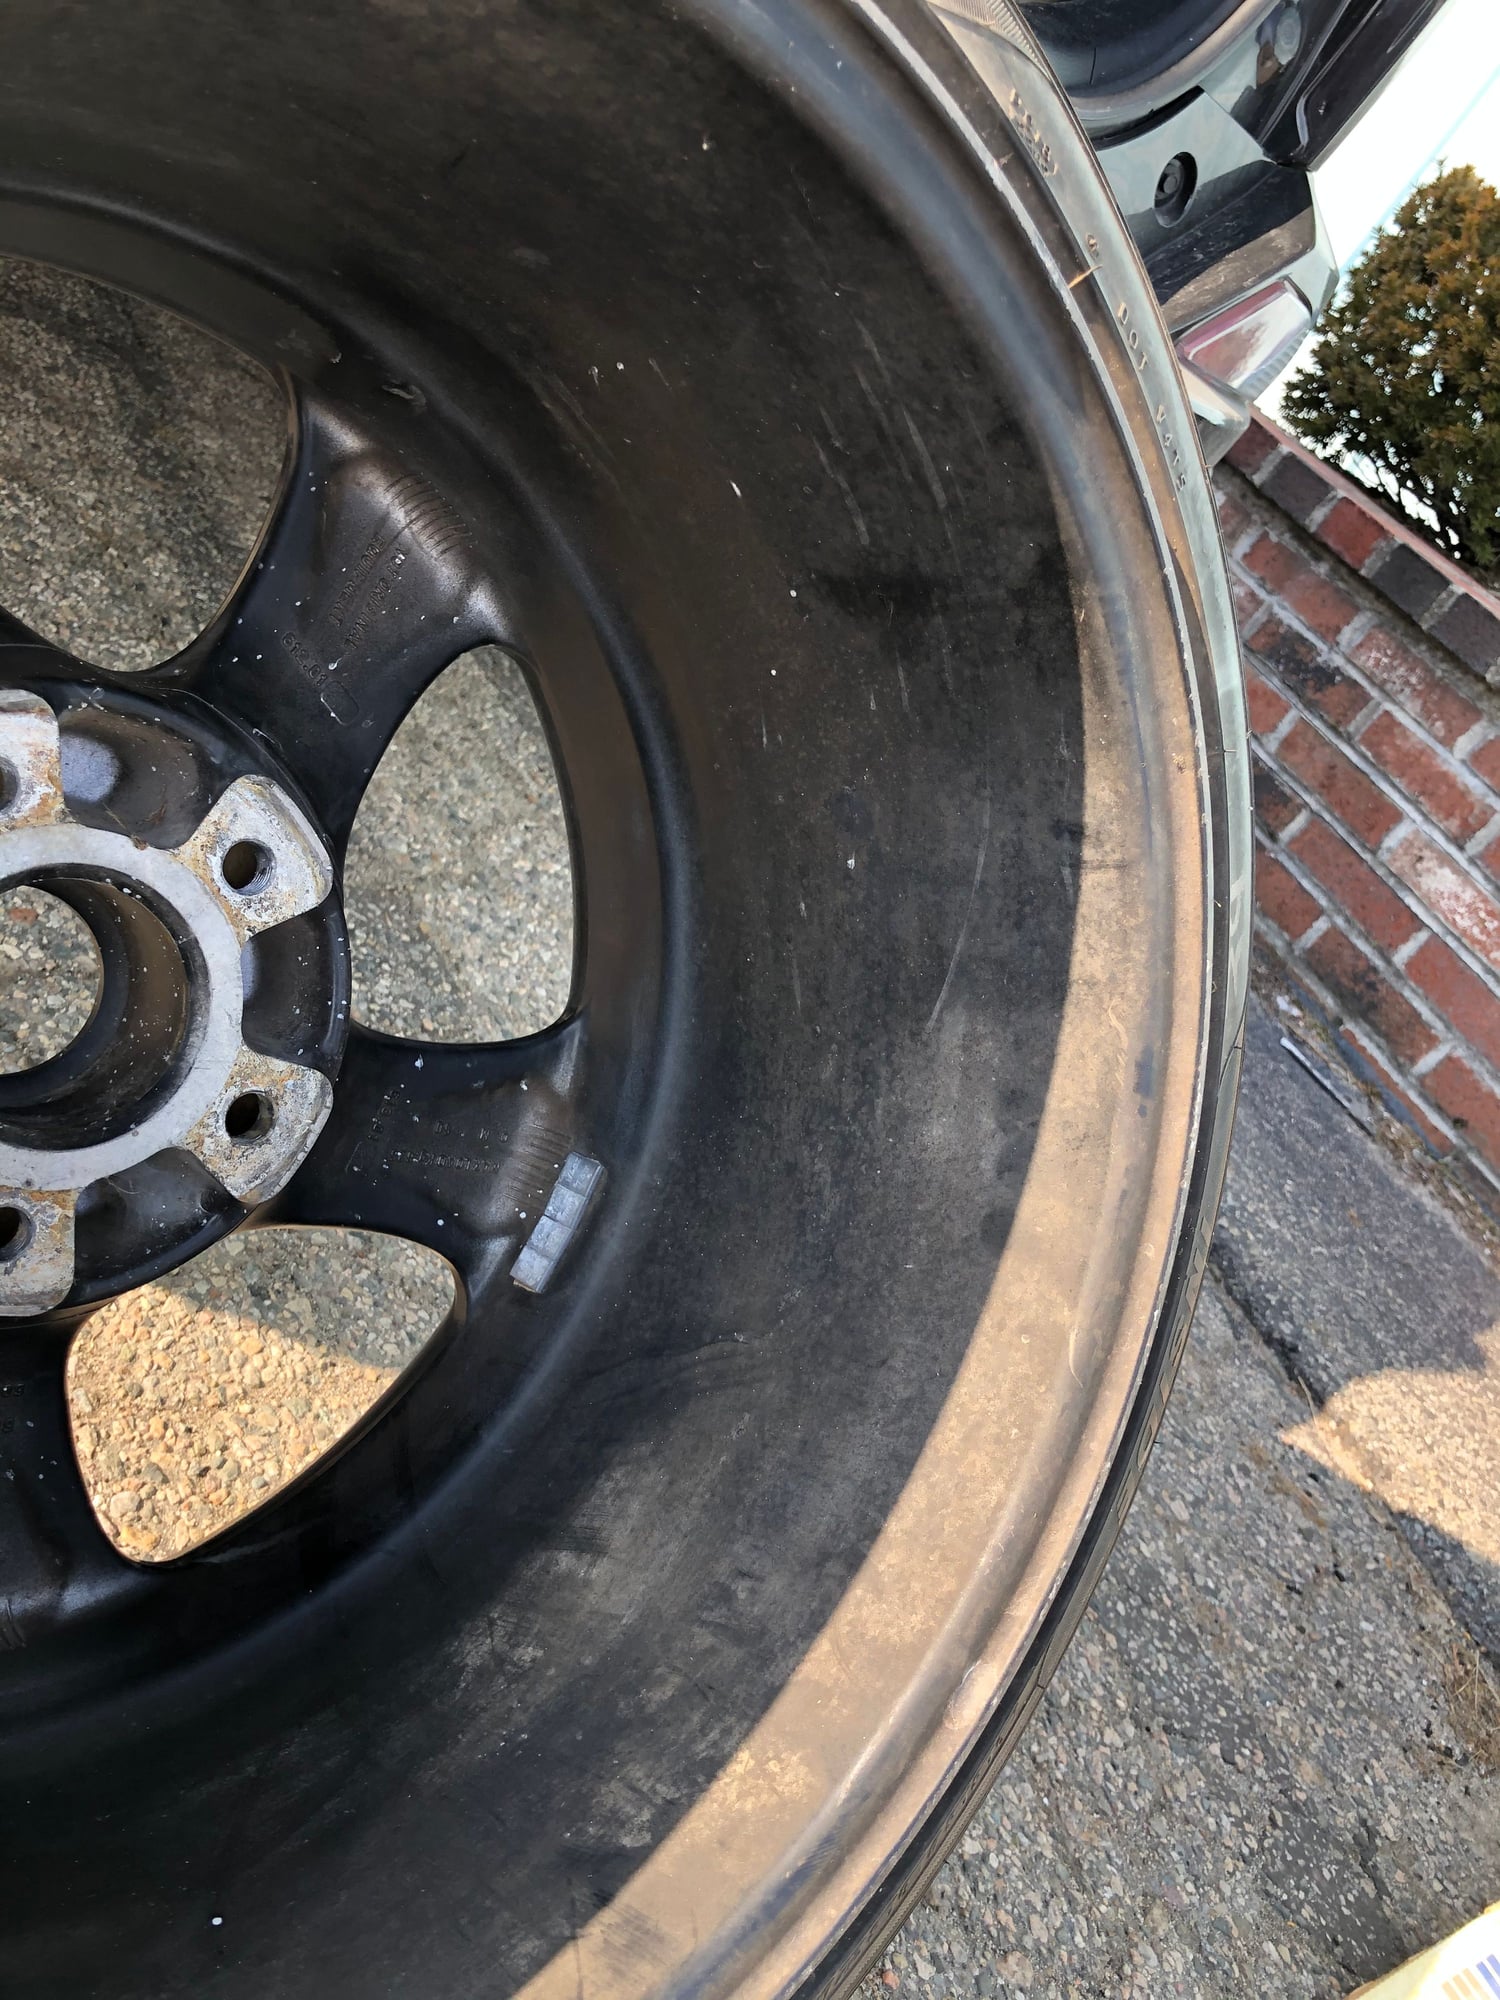 Wheels and Tires/Axles - 18" Rims 8.5 x 18 and 10 x 18 - Used - All Years Porsche All Models - Swansea, MA 02777, United States